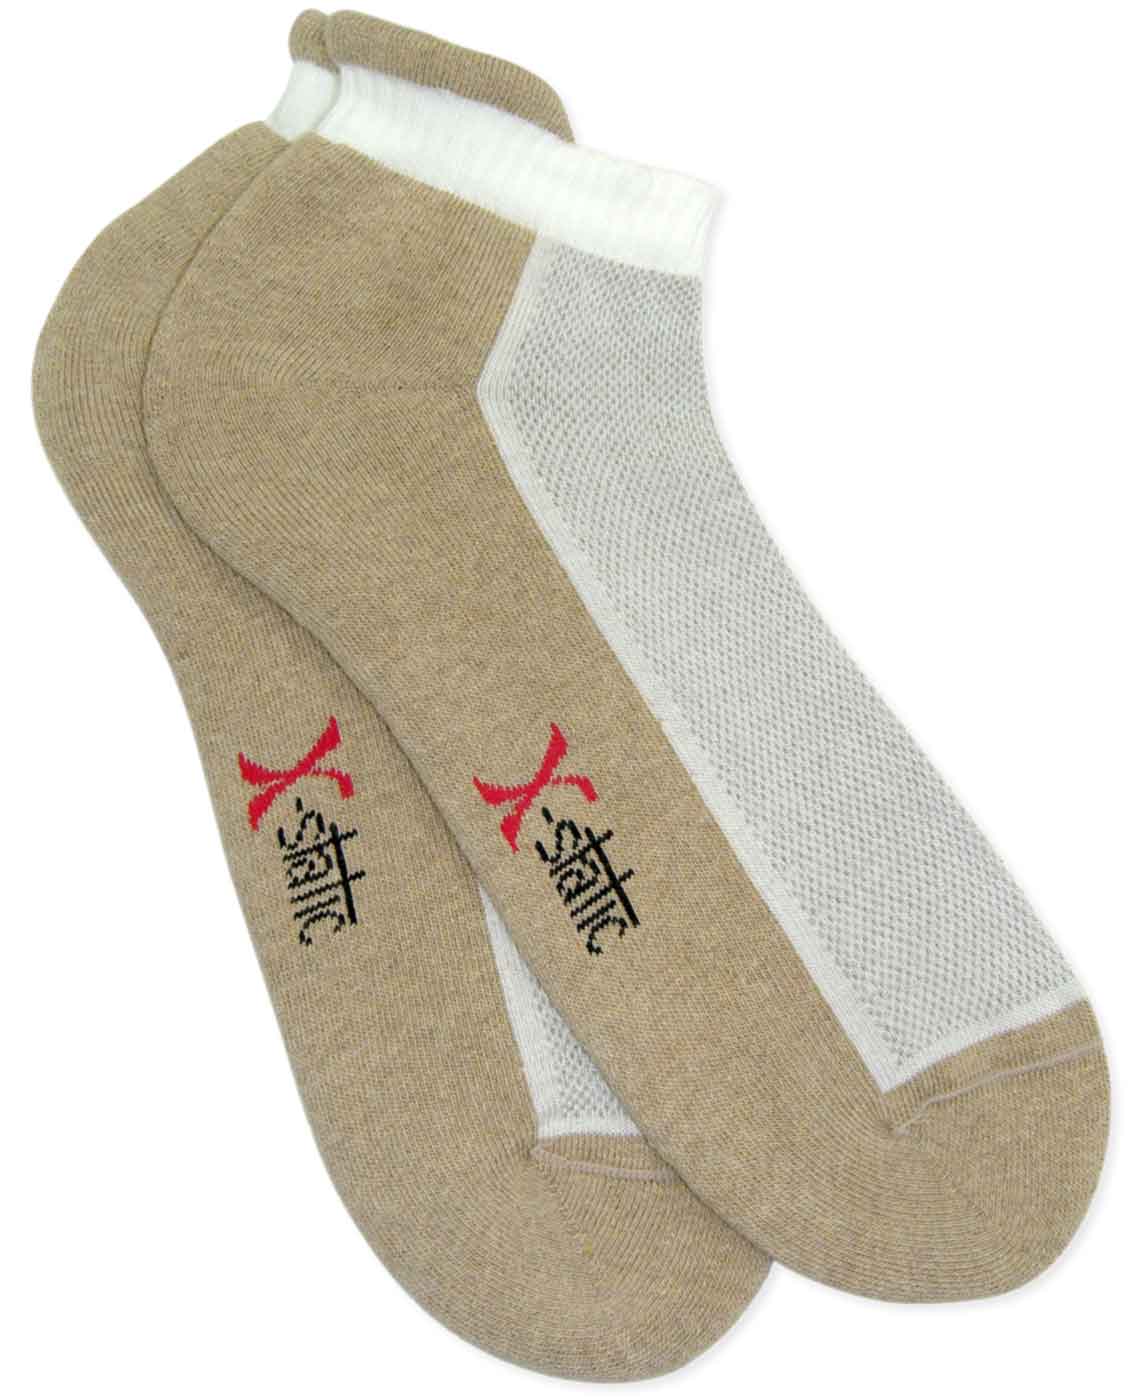 Carnation Footcare Silversock - Adult Size - Trainer Sock One Pair ...